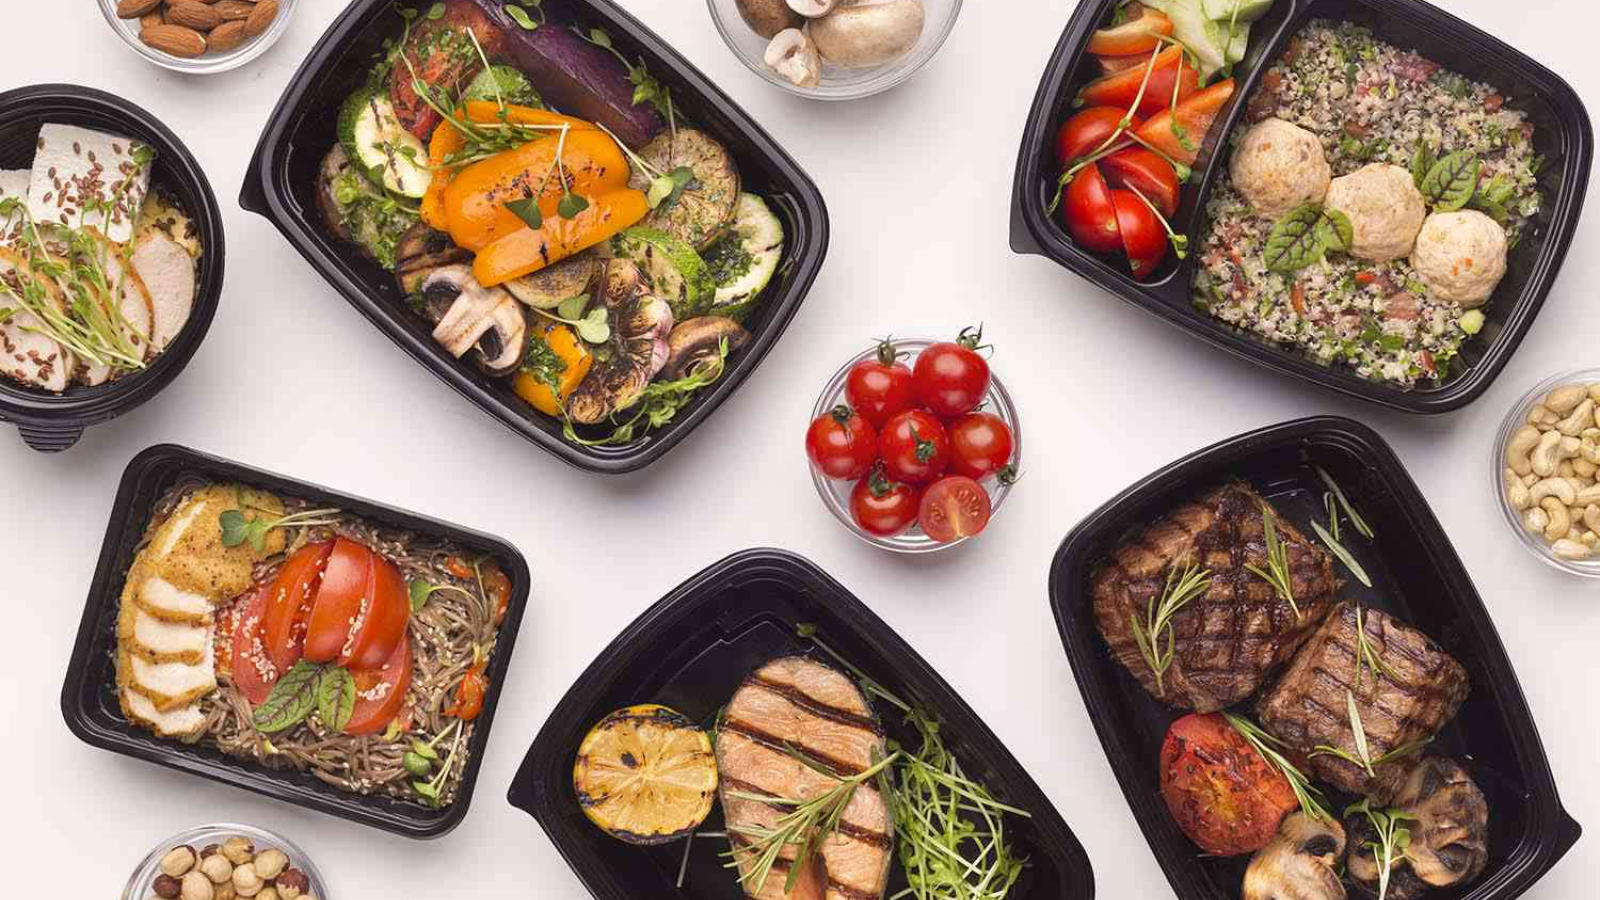  Are Meal Kit Delivery Services for College Students Worth It? 